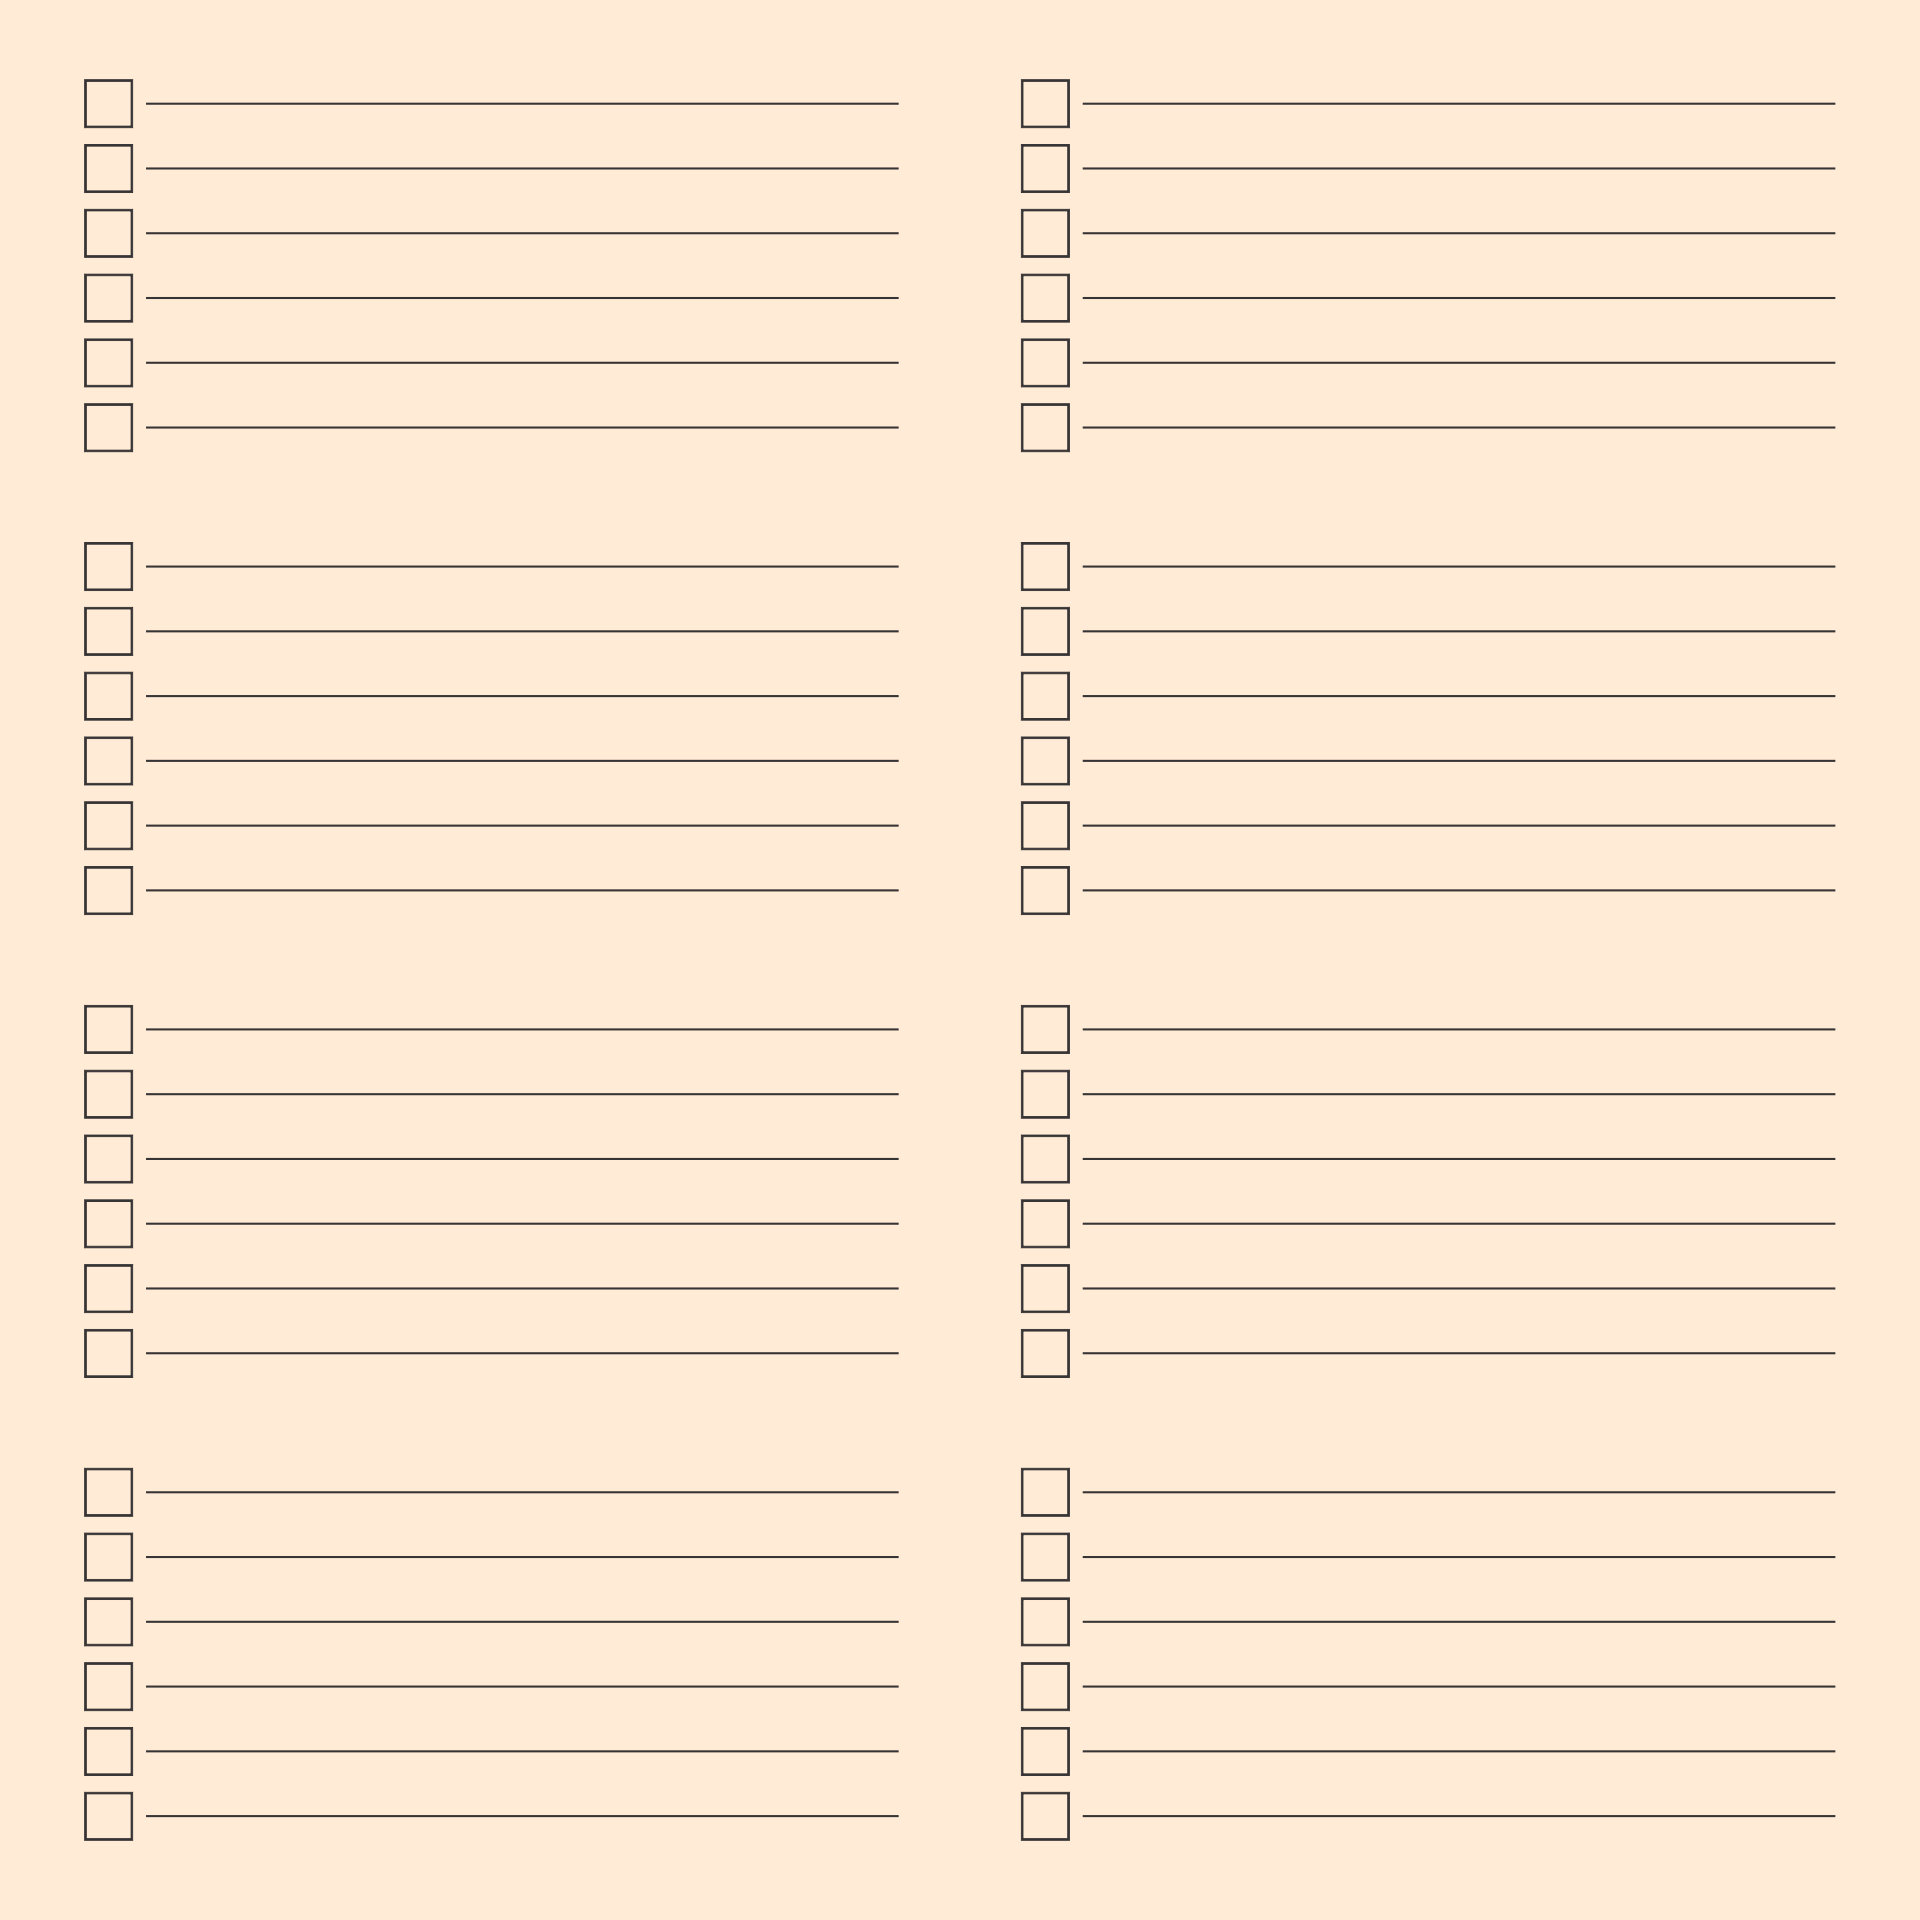 7 Best Images Of Editable Blank Printable Checklists Free Printable 